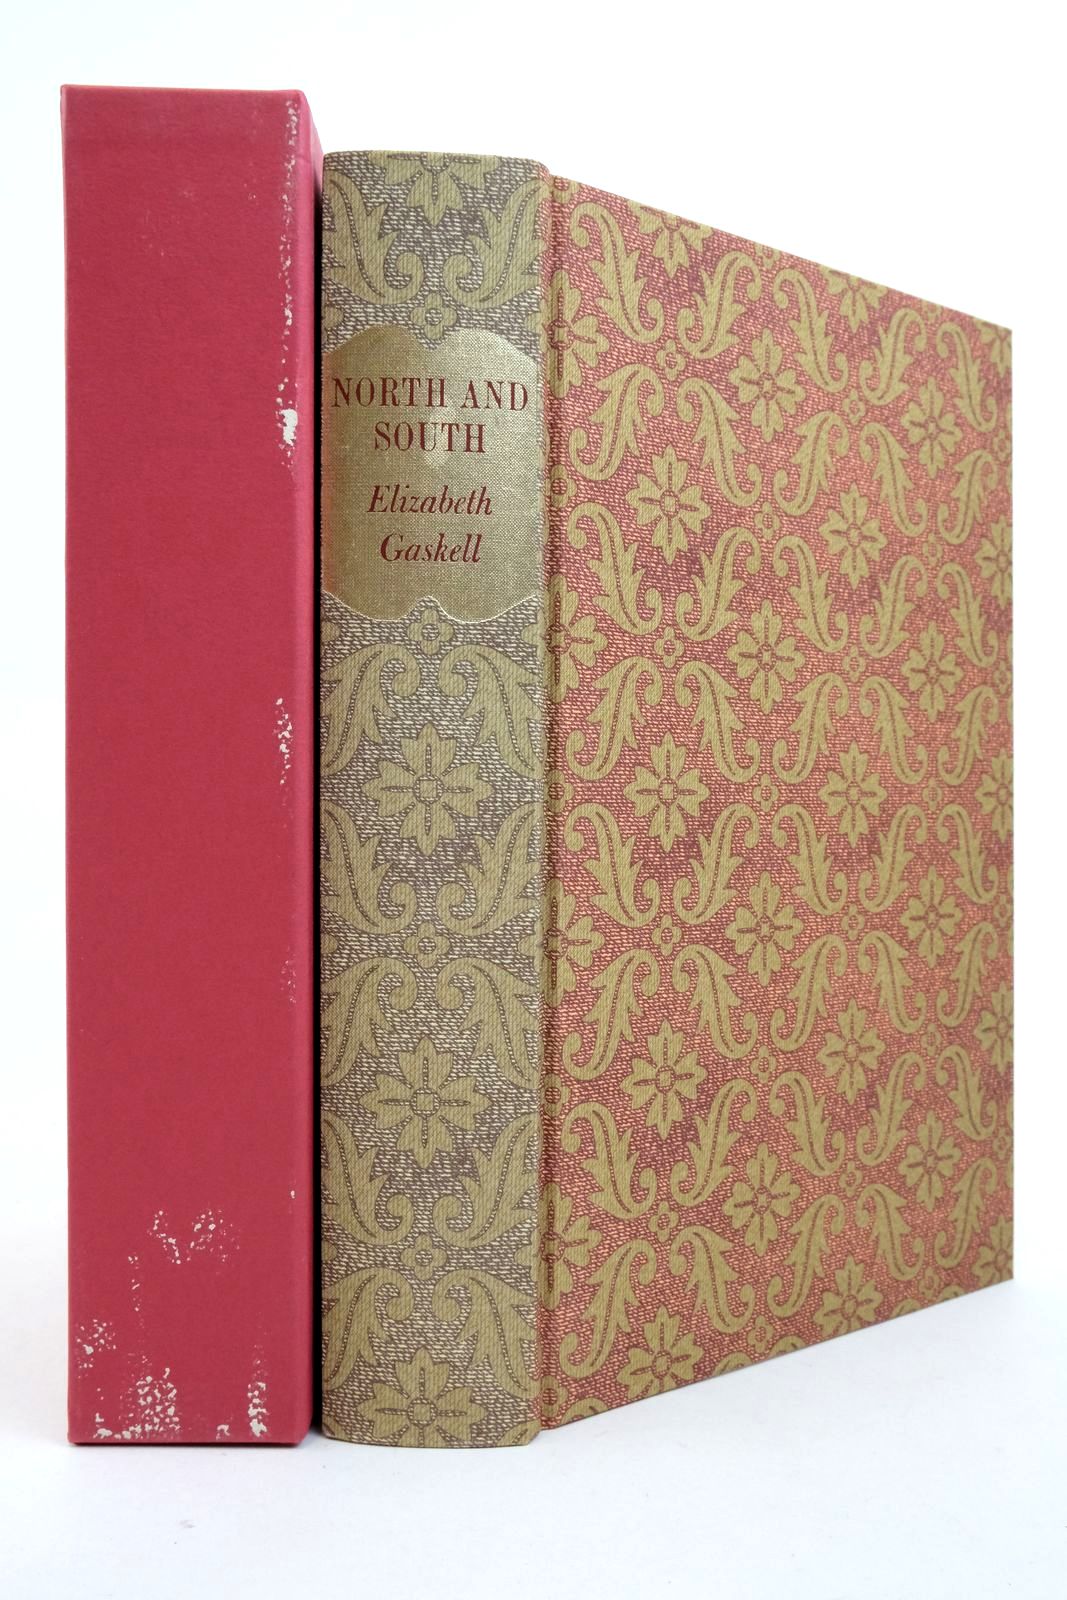 Photo of NORTH AND SOUTH written by Gaskell, Elizabeth illustrated by Pendle, Alexy published by Folio Society (STOCK CODE: 2138142)  for sale by Stella & Rose's Books